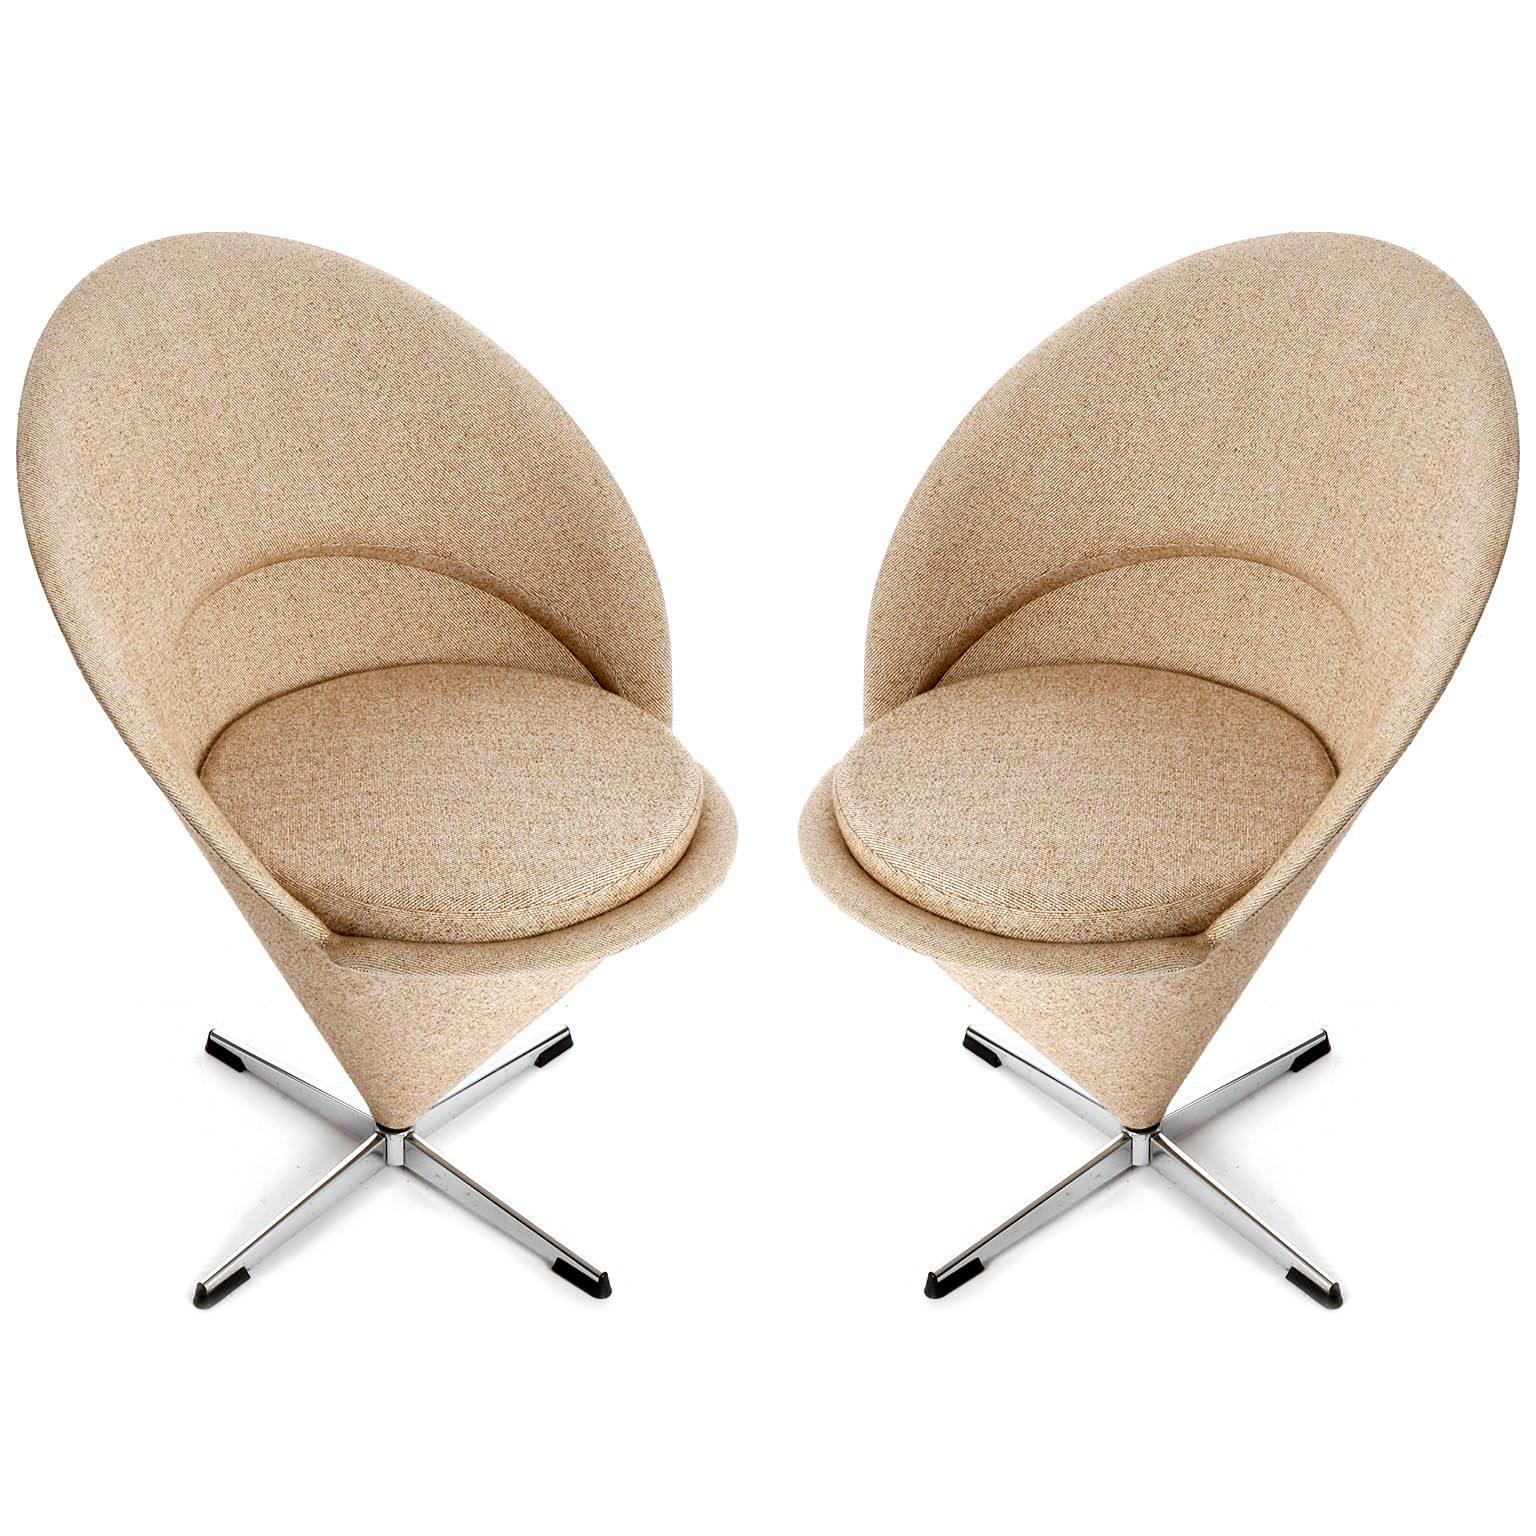 A pair of Danish modern Cone chairs designed by Verner Panton (1926 - 1998) in 1958 and manufactured in mid-century, circa 1960. The chairs are in very good original condition with an original brown and beige wool upholstery.

About Verner